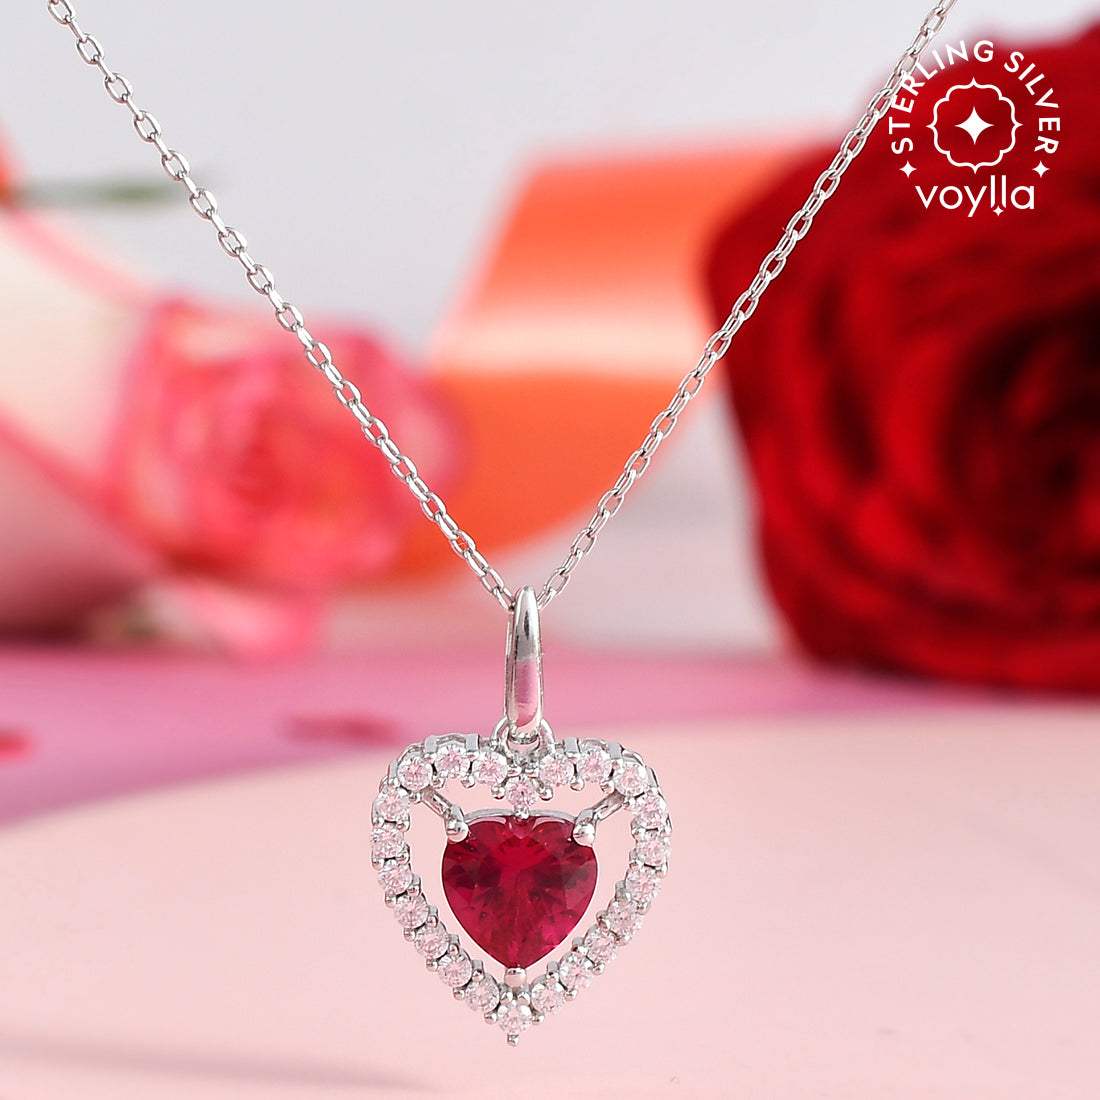 Women's Silver And Red Heart Shaped Pendant - Voylla